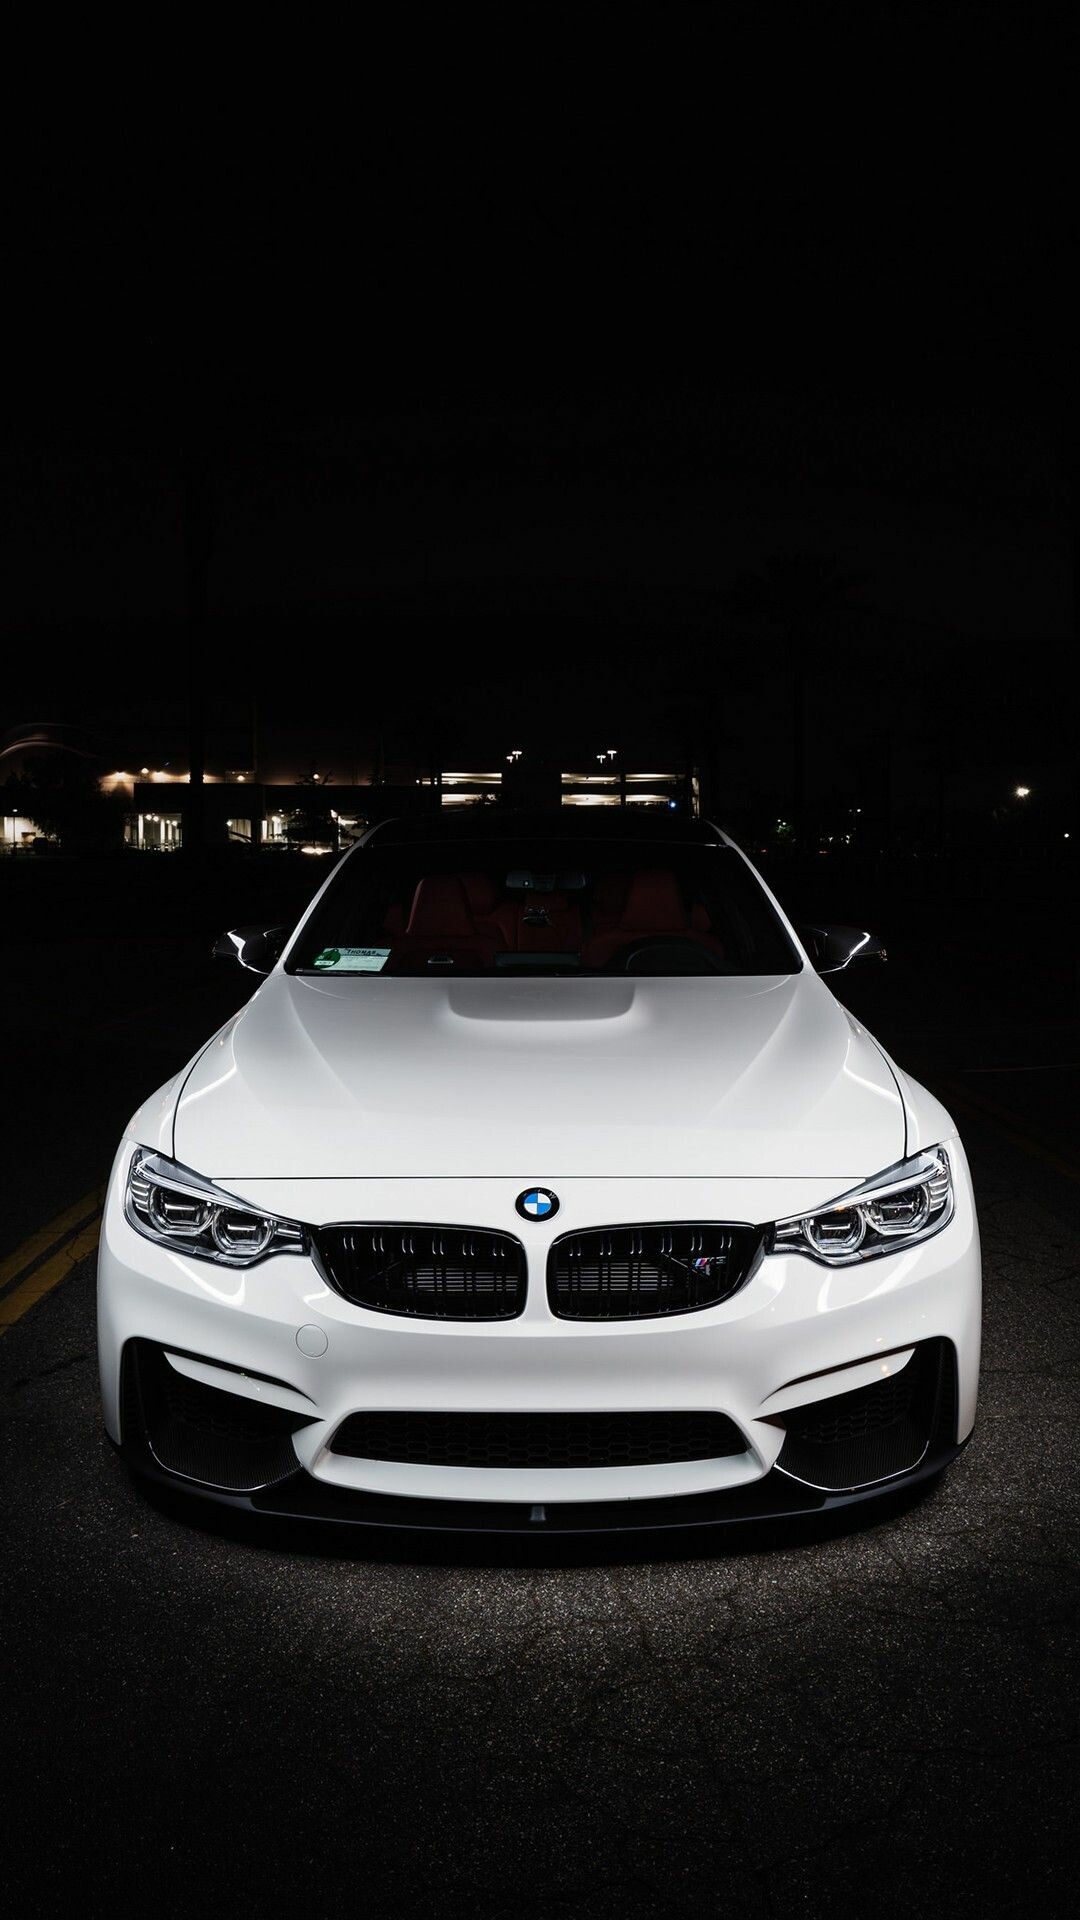 BMW: One of today's most successful luxury car brands, Vehicles. 1080x1920 Full HD Wallpaper.